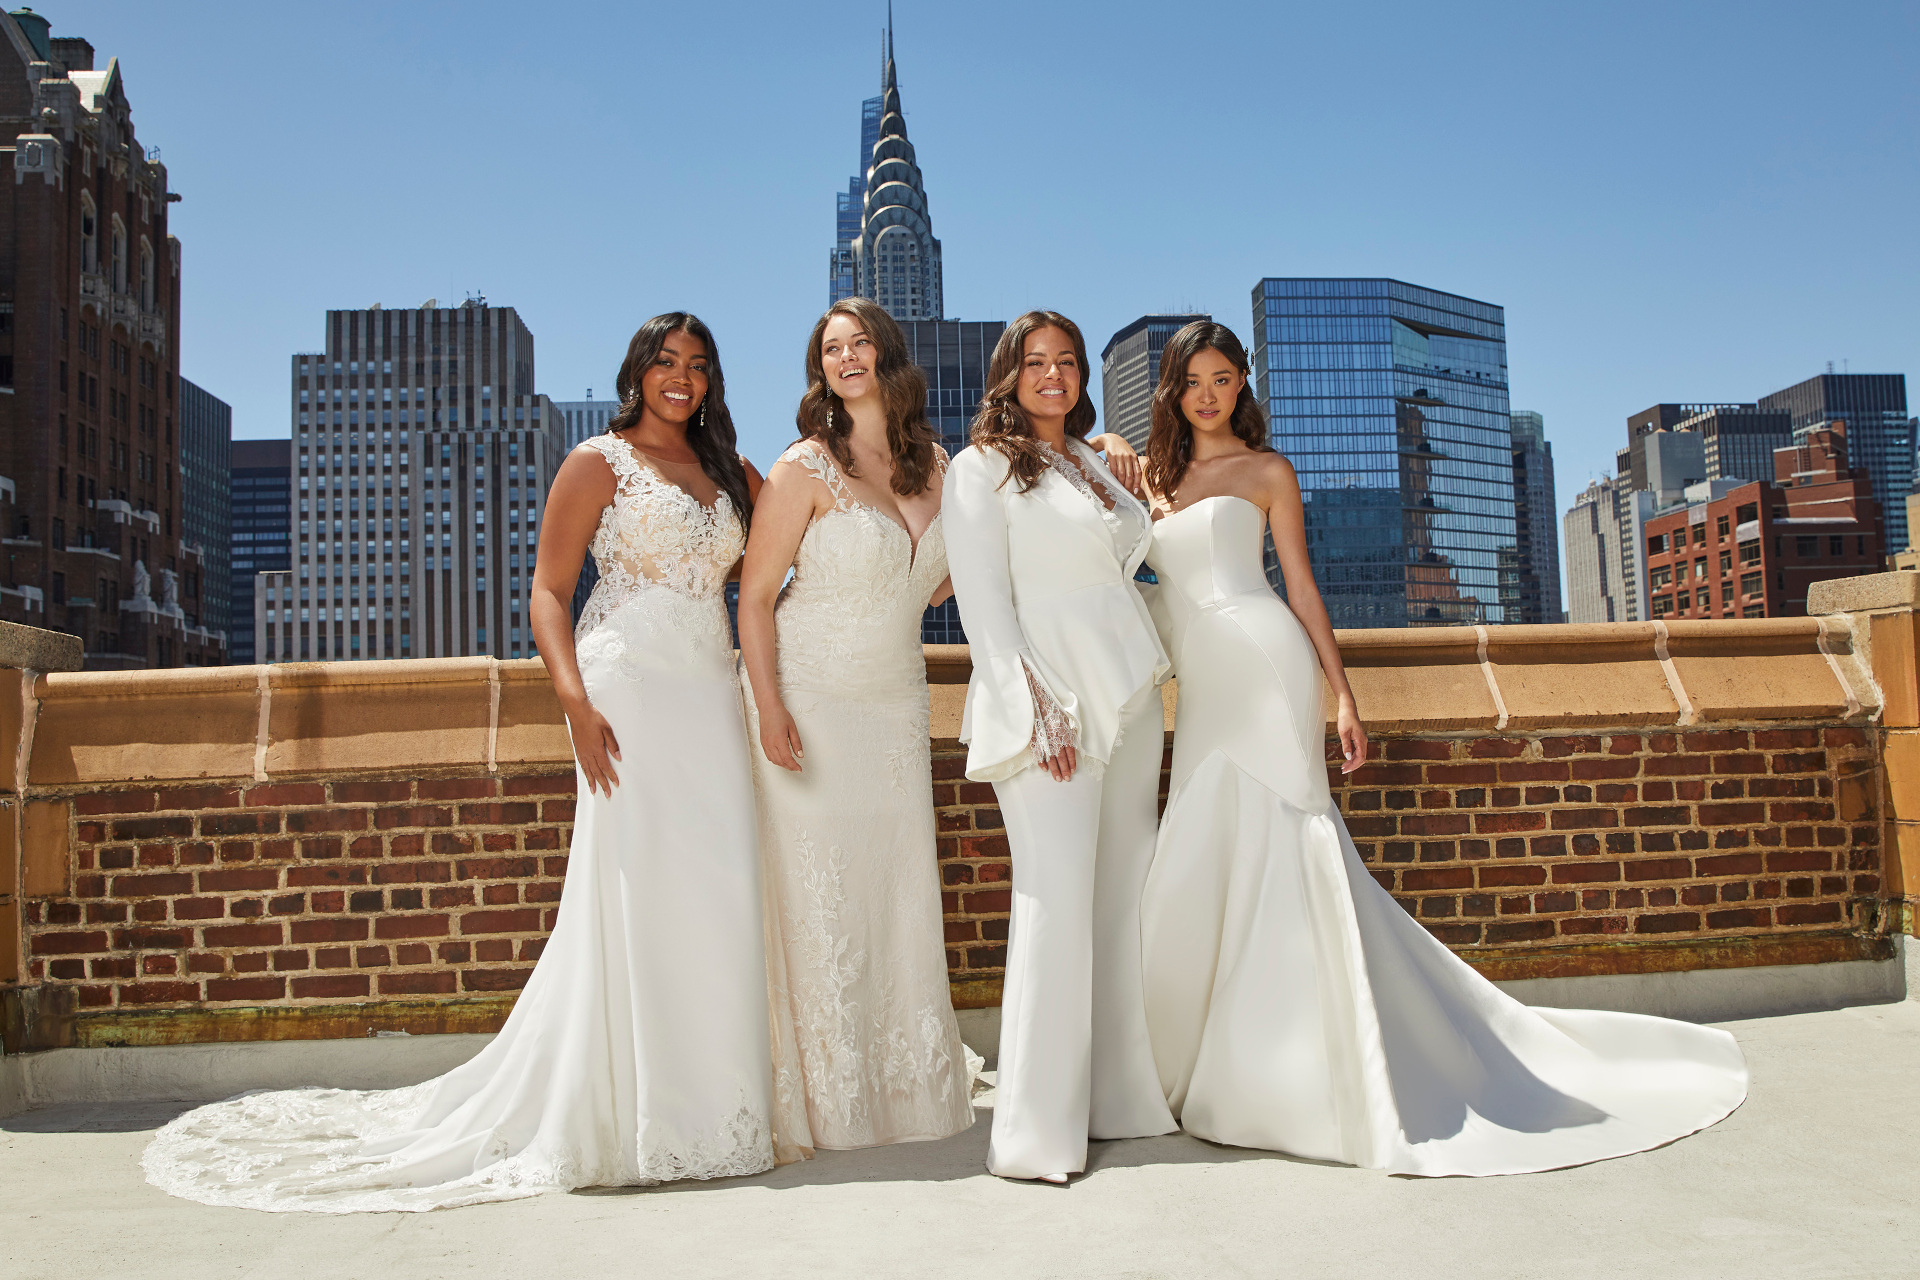 Four women in wedding outfits stood on top of building in city | bridal shops nyc